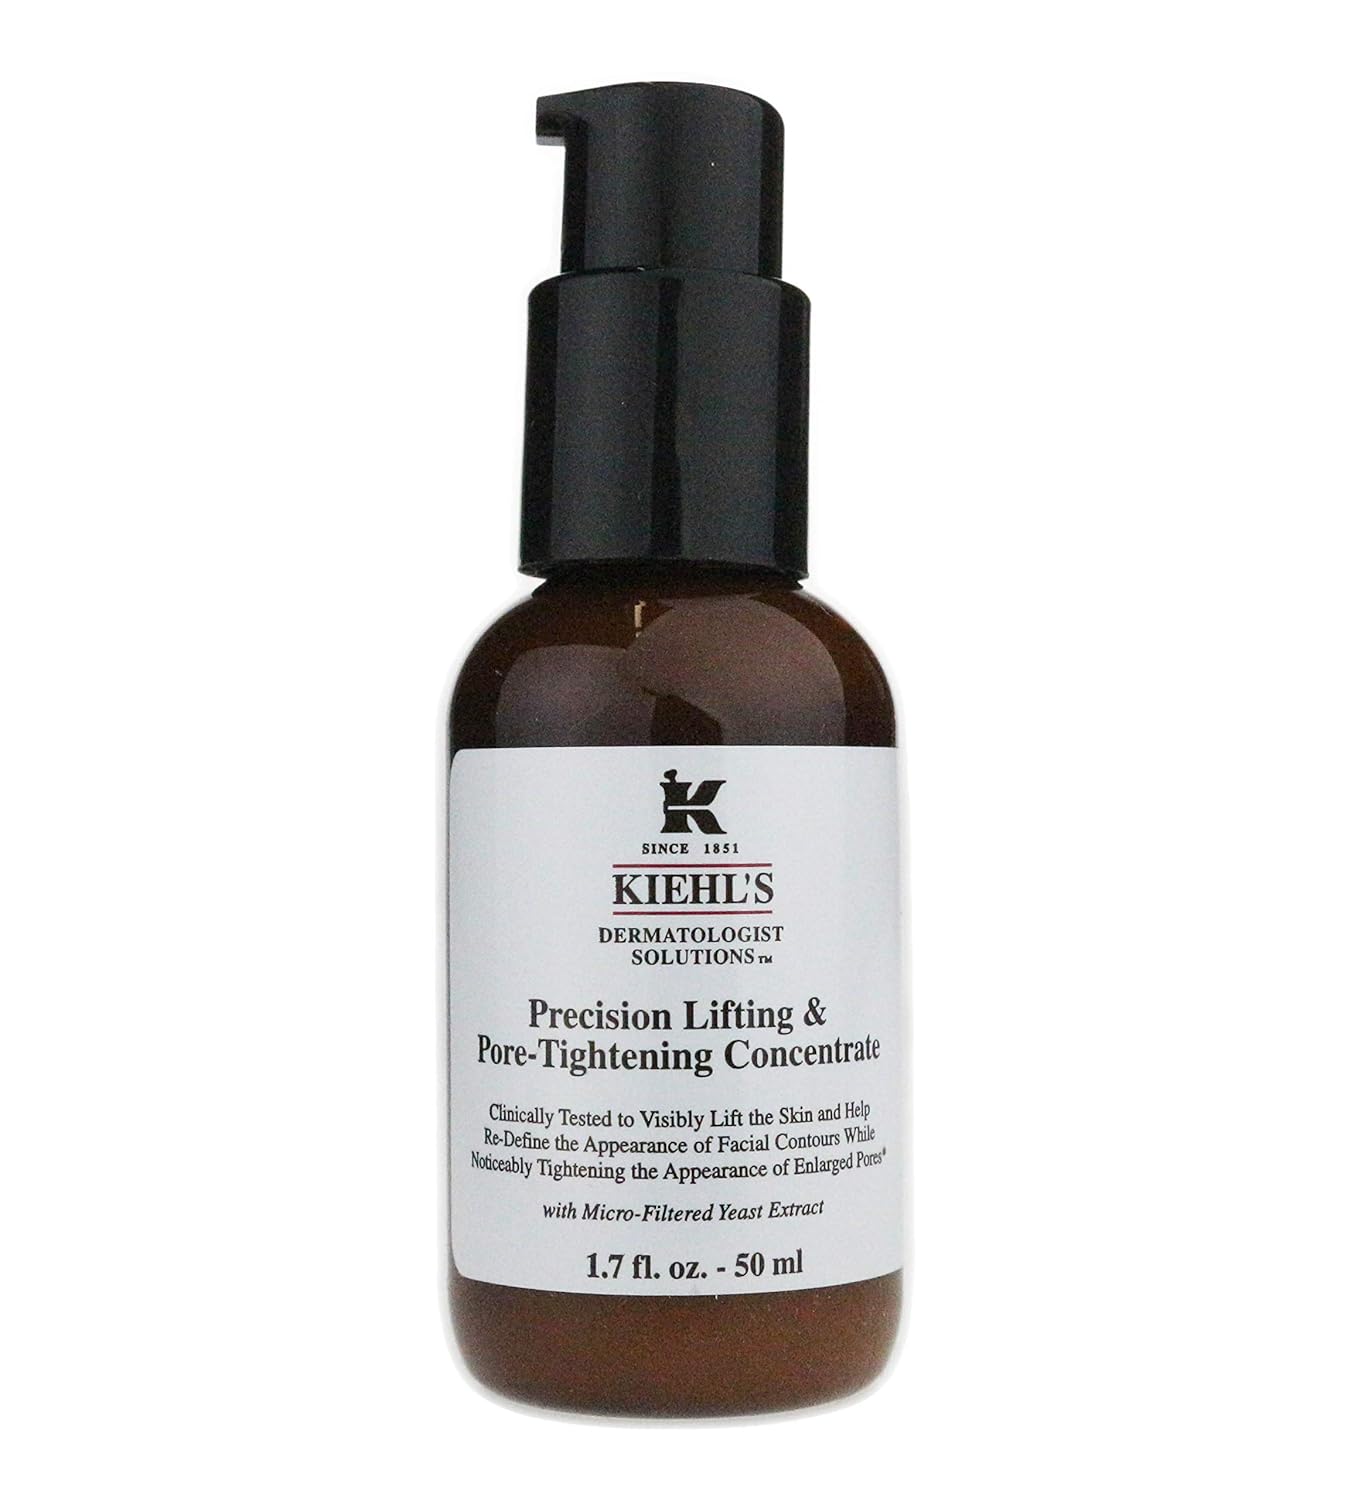 Kiehl's Precision Lifting & Pore -Tightening Concentrate 1.7/20 New In Box